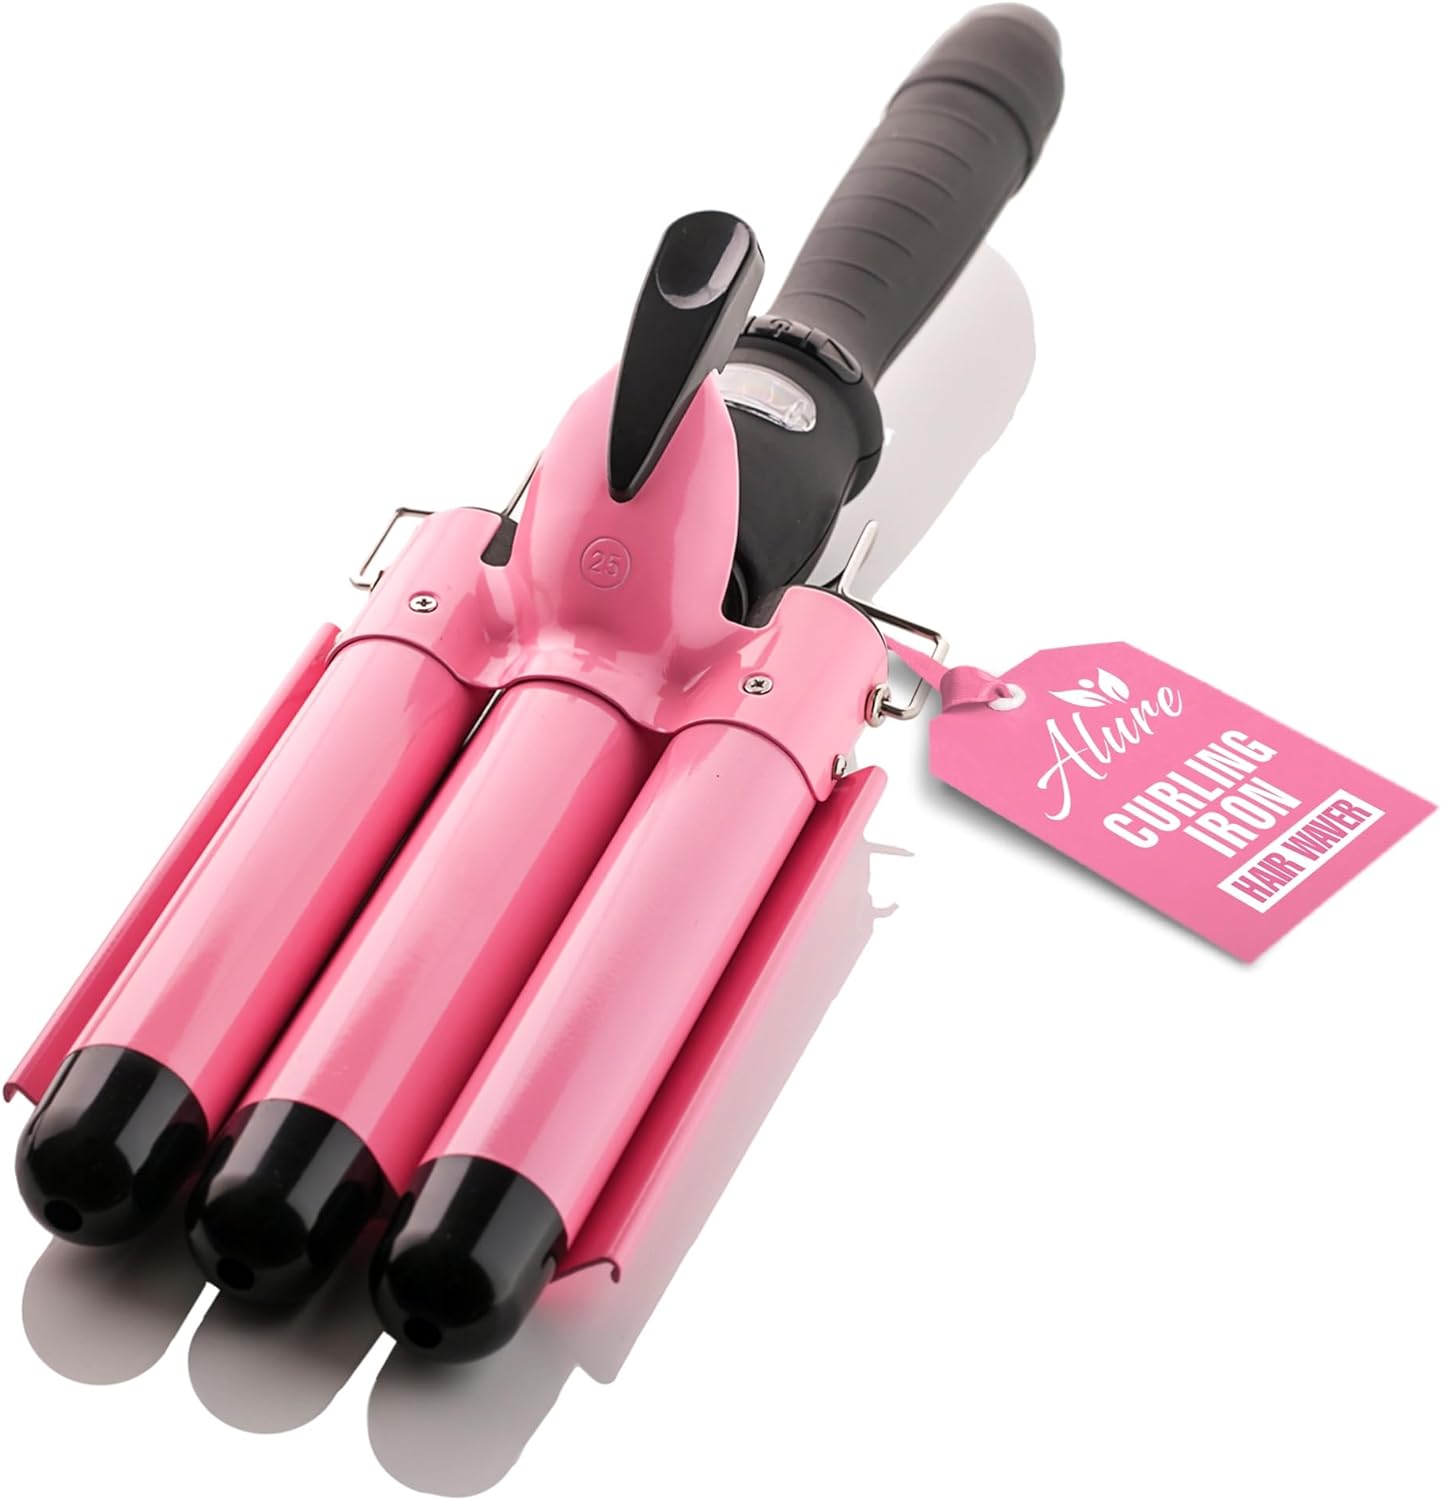 Alure Three Barrel Curling Iron Wand Hair Waver with LCD Temperature Display - 1 Inch Ceramic Tourmaline Triple Barrels, Dual Voltage Crimp